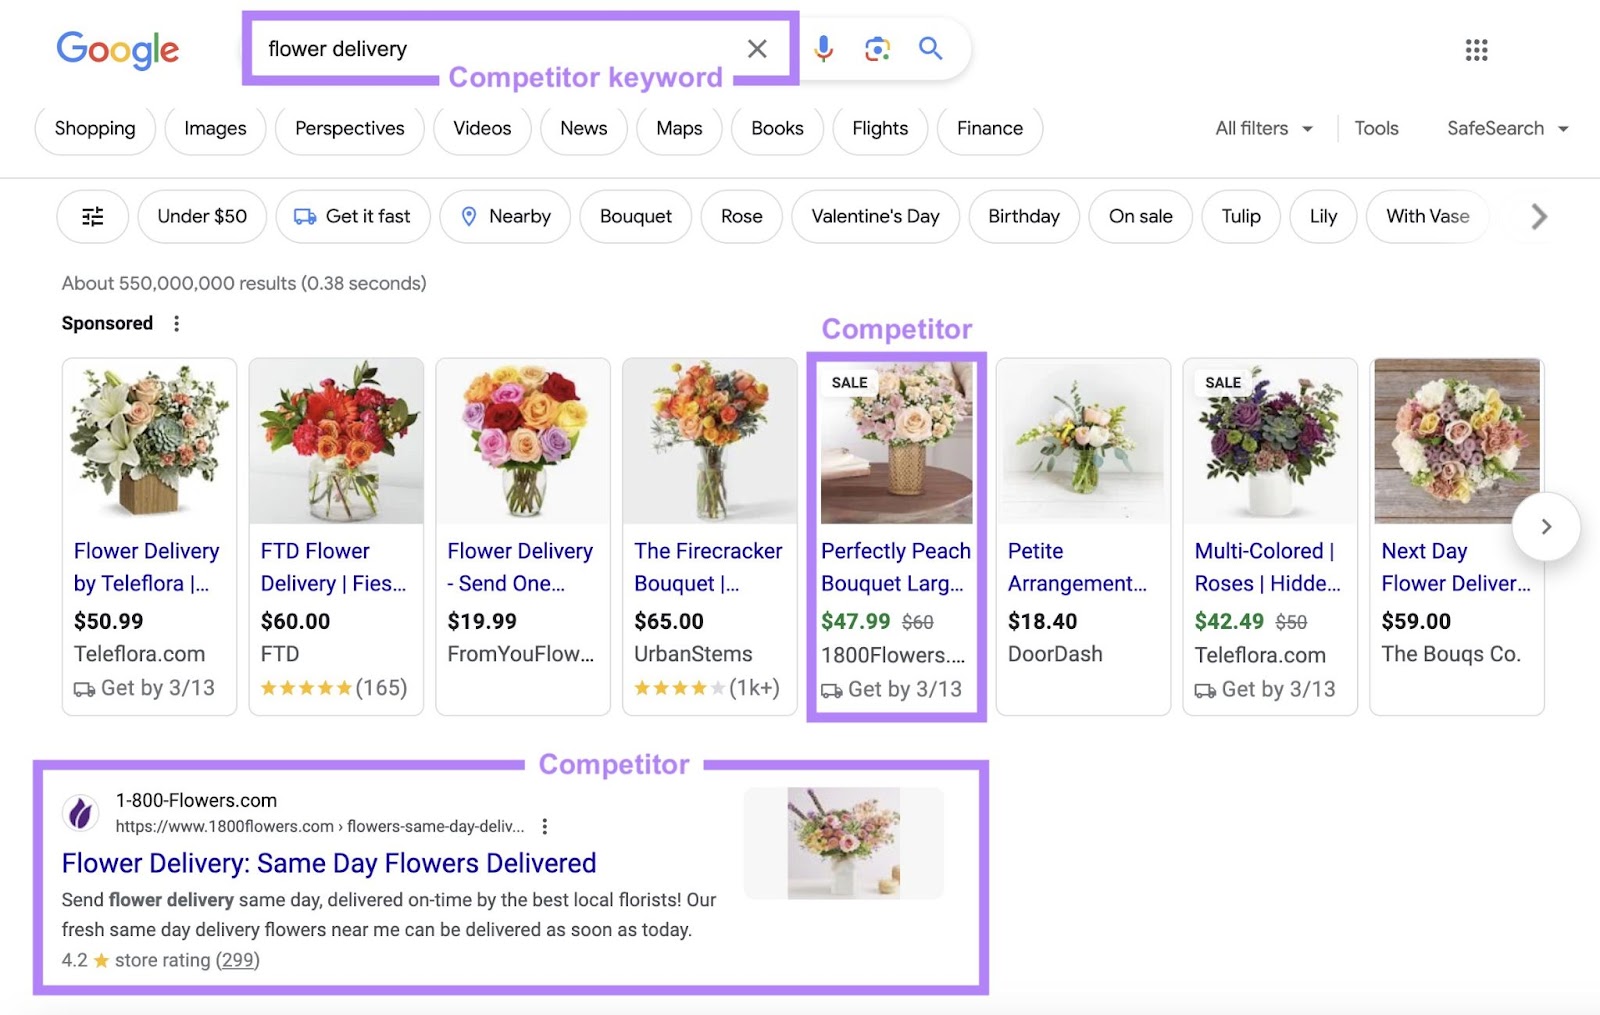 Google results for “flower delivery” labeled as competitive keyword